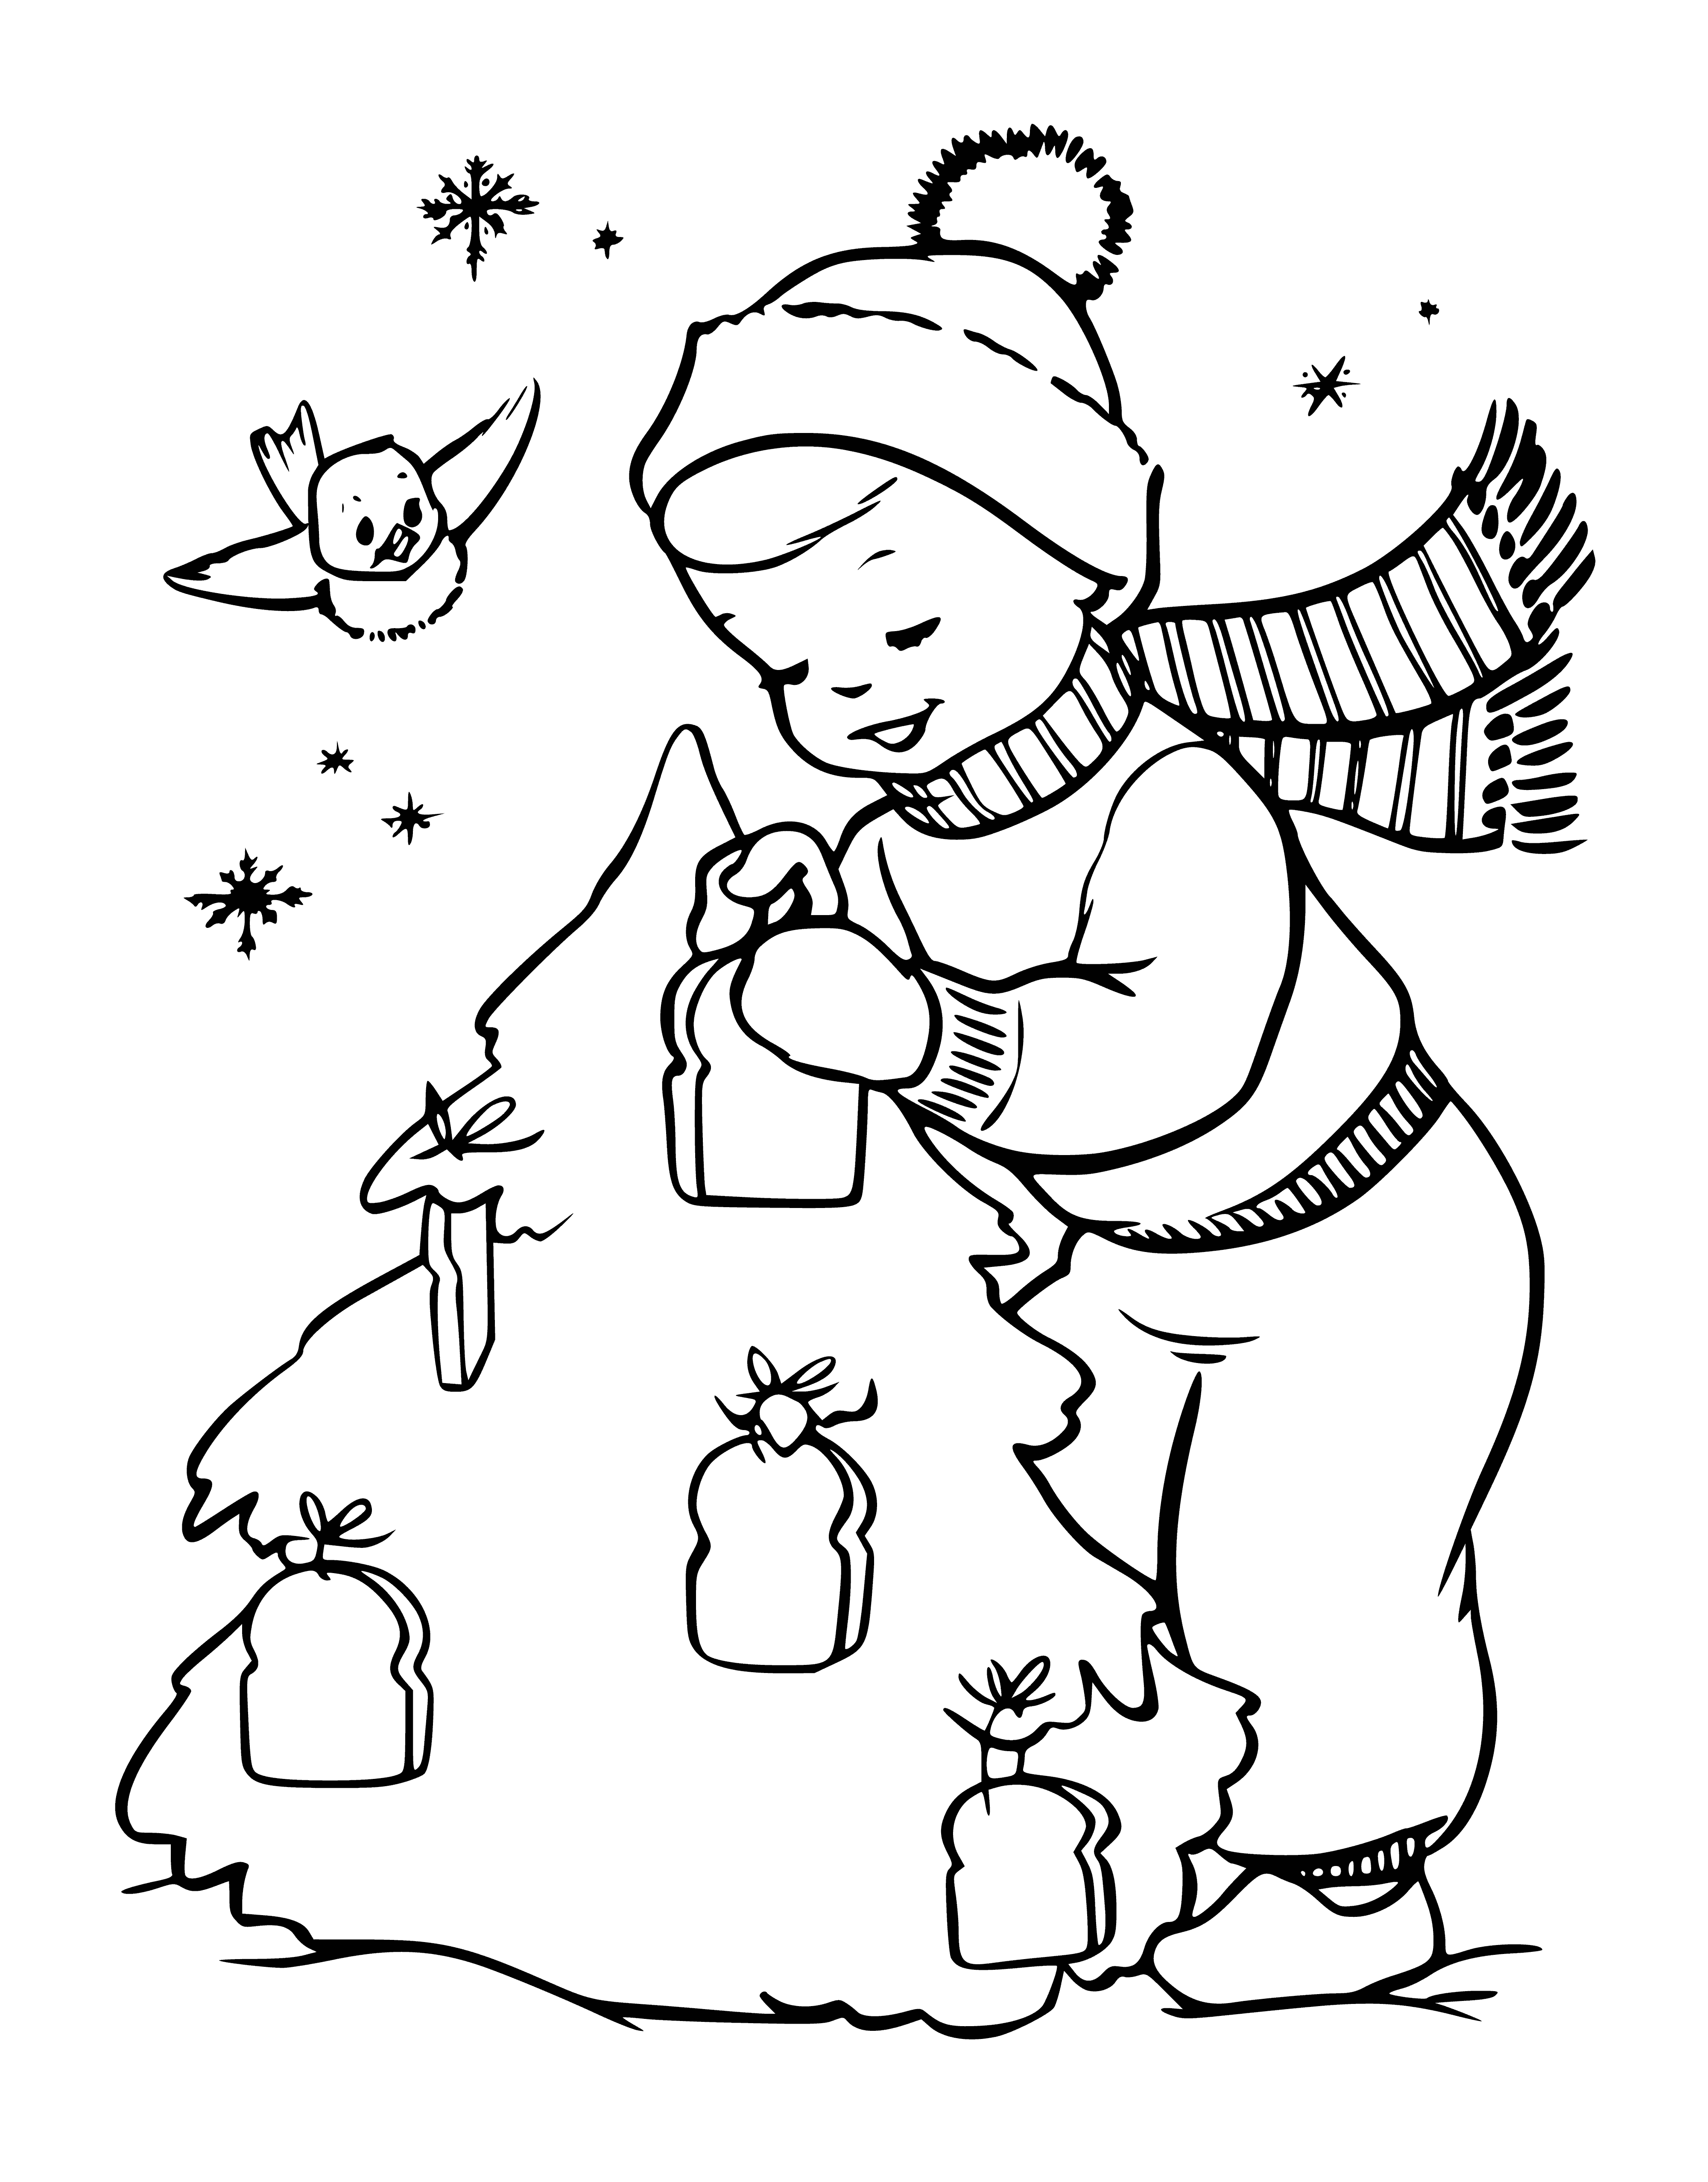 coloring page: Small Christmas tree w/ star, surrounded by presents - a festive scene!